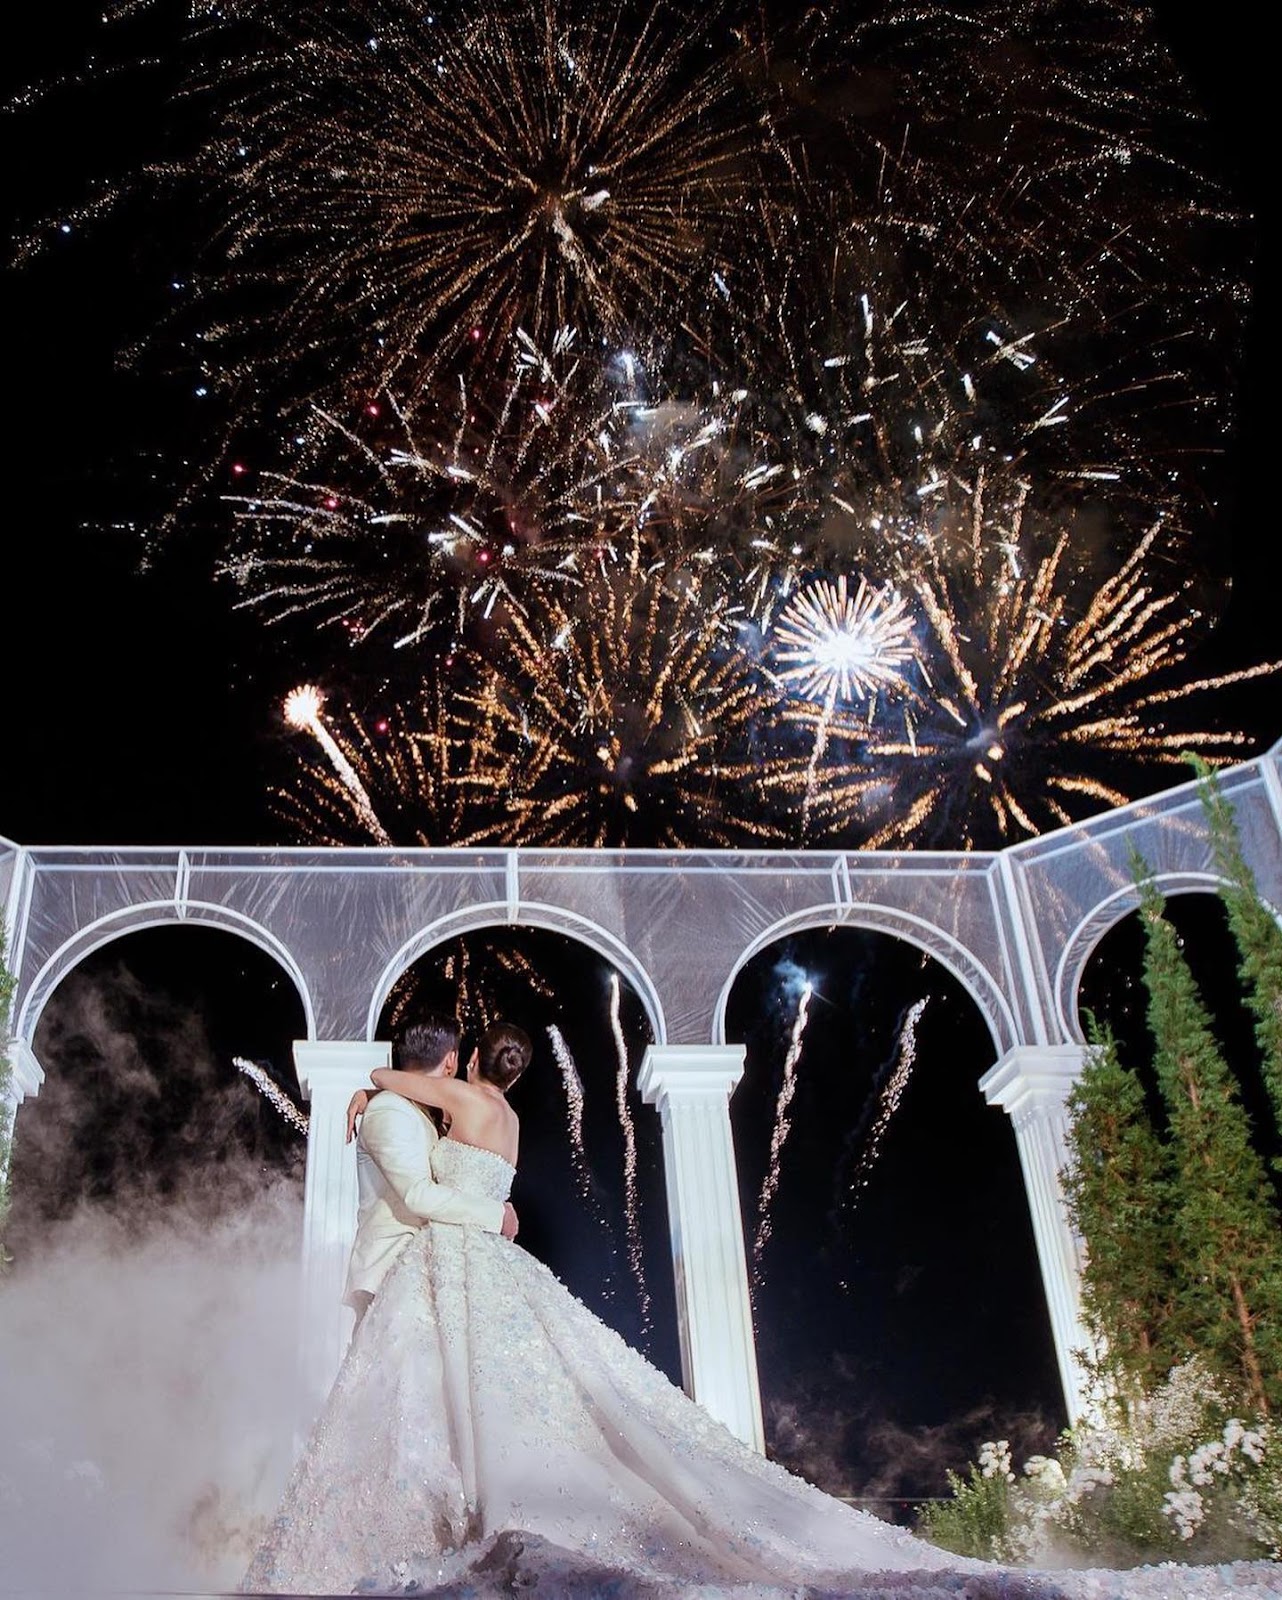 11 Incredible Wedding Destinations in the Middle East